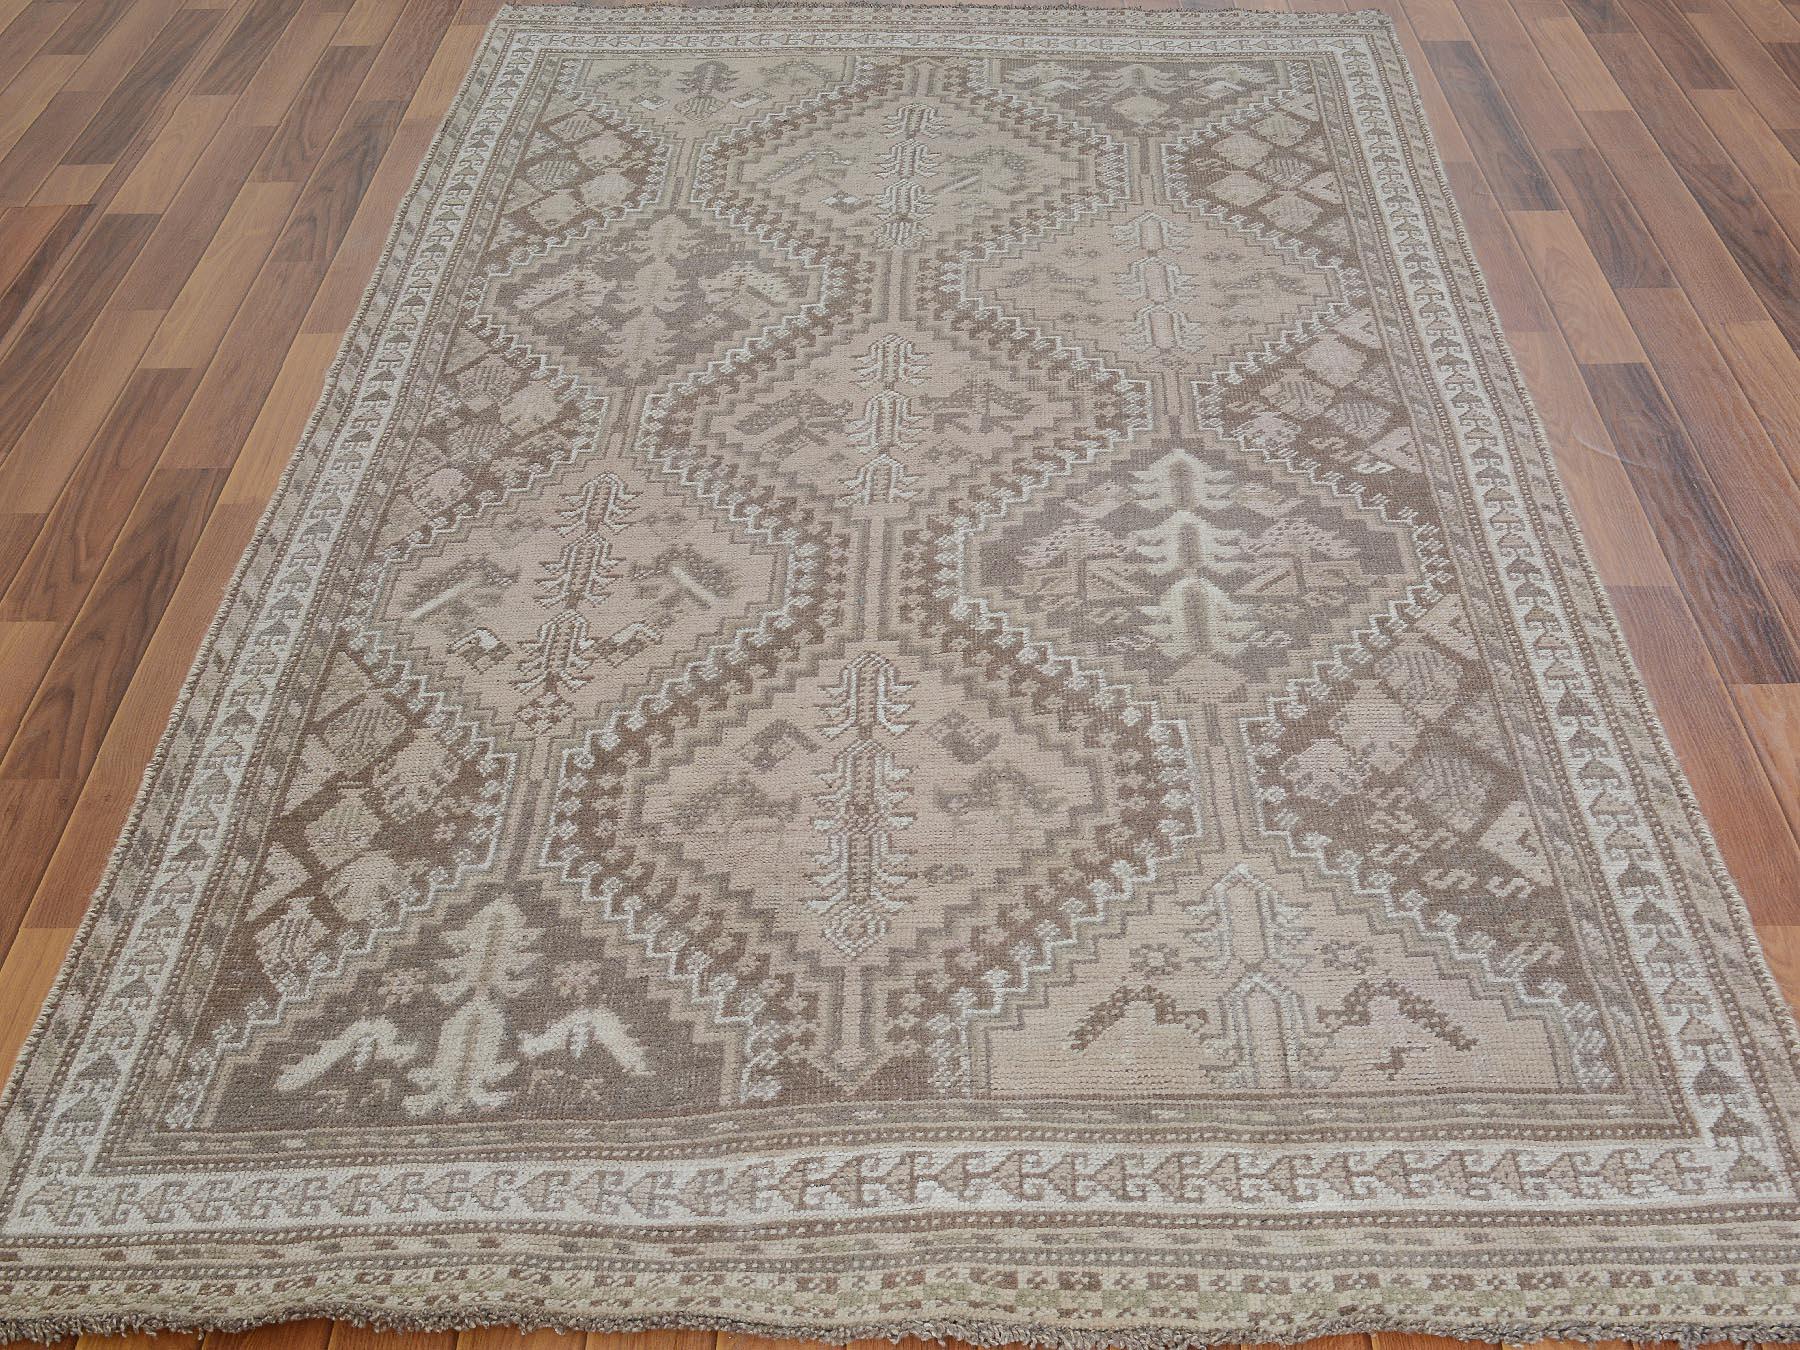 This fabulous hand knotted carpet has been created and designed for extra strength and durability. This rug has been handcrafted for weeks in the traditional method that is used to make rugs. This is truly a one of kind piece.

Exact rug size in